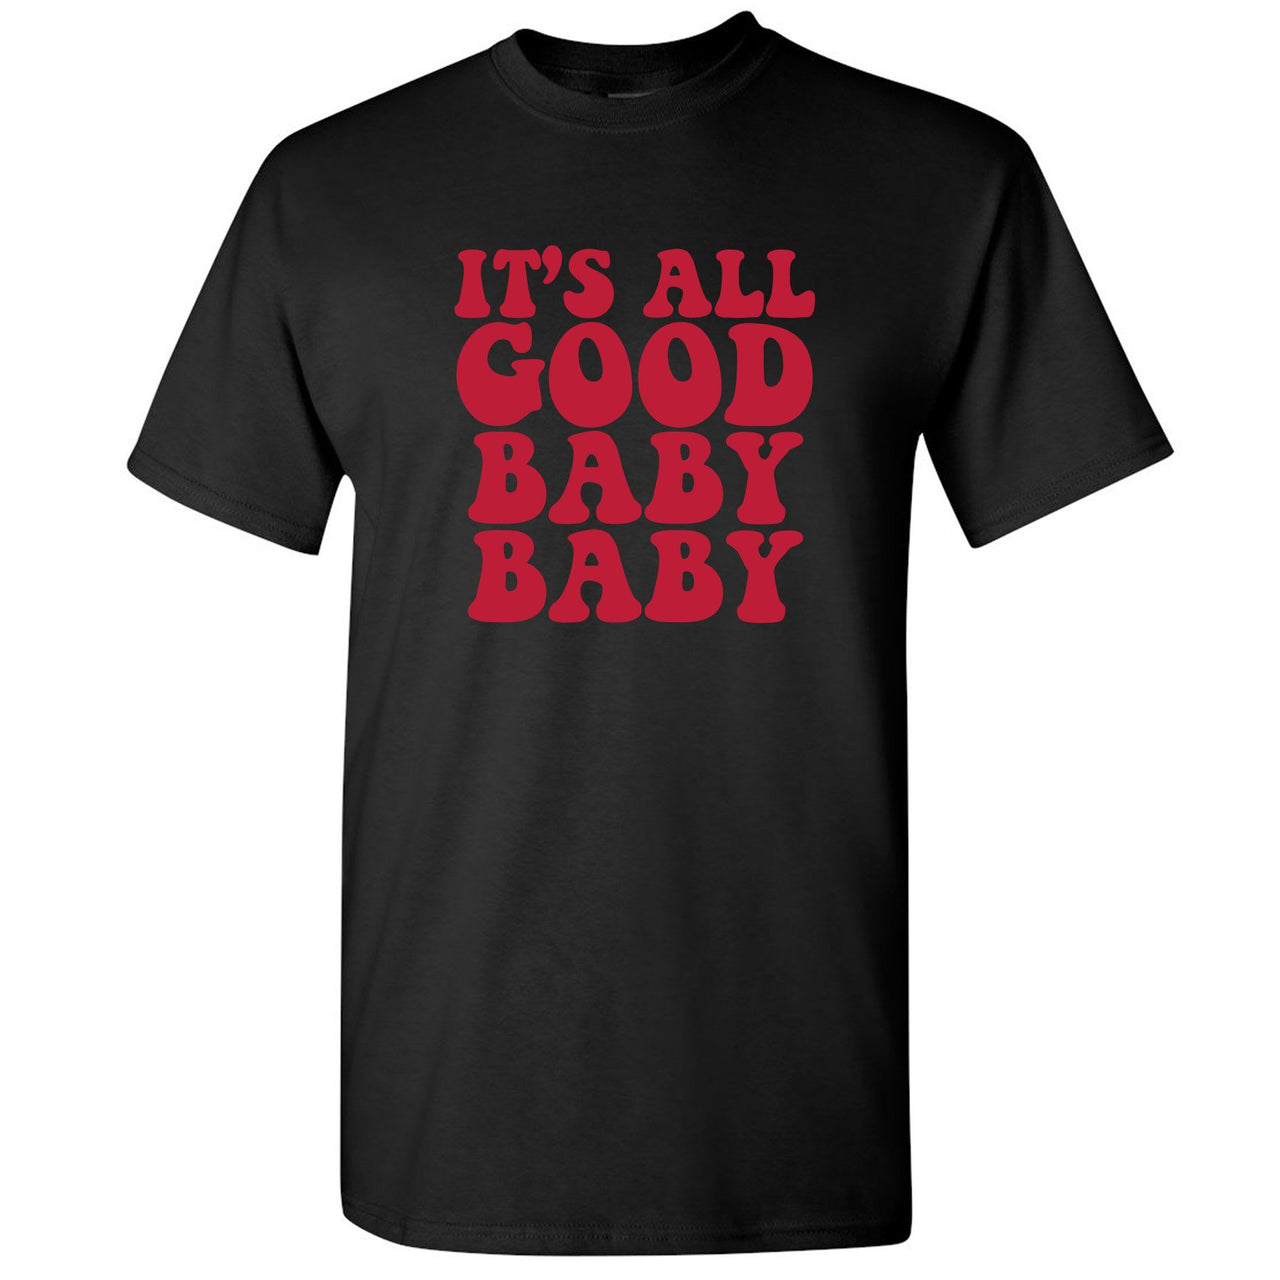 Reflections of a Champion 7s T Shirt | It's All Good Baby Baby, Black